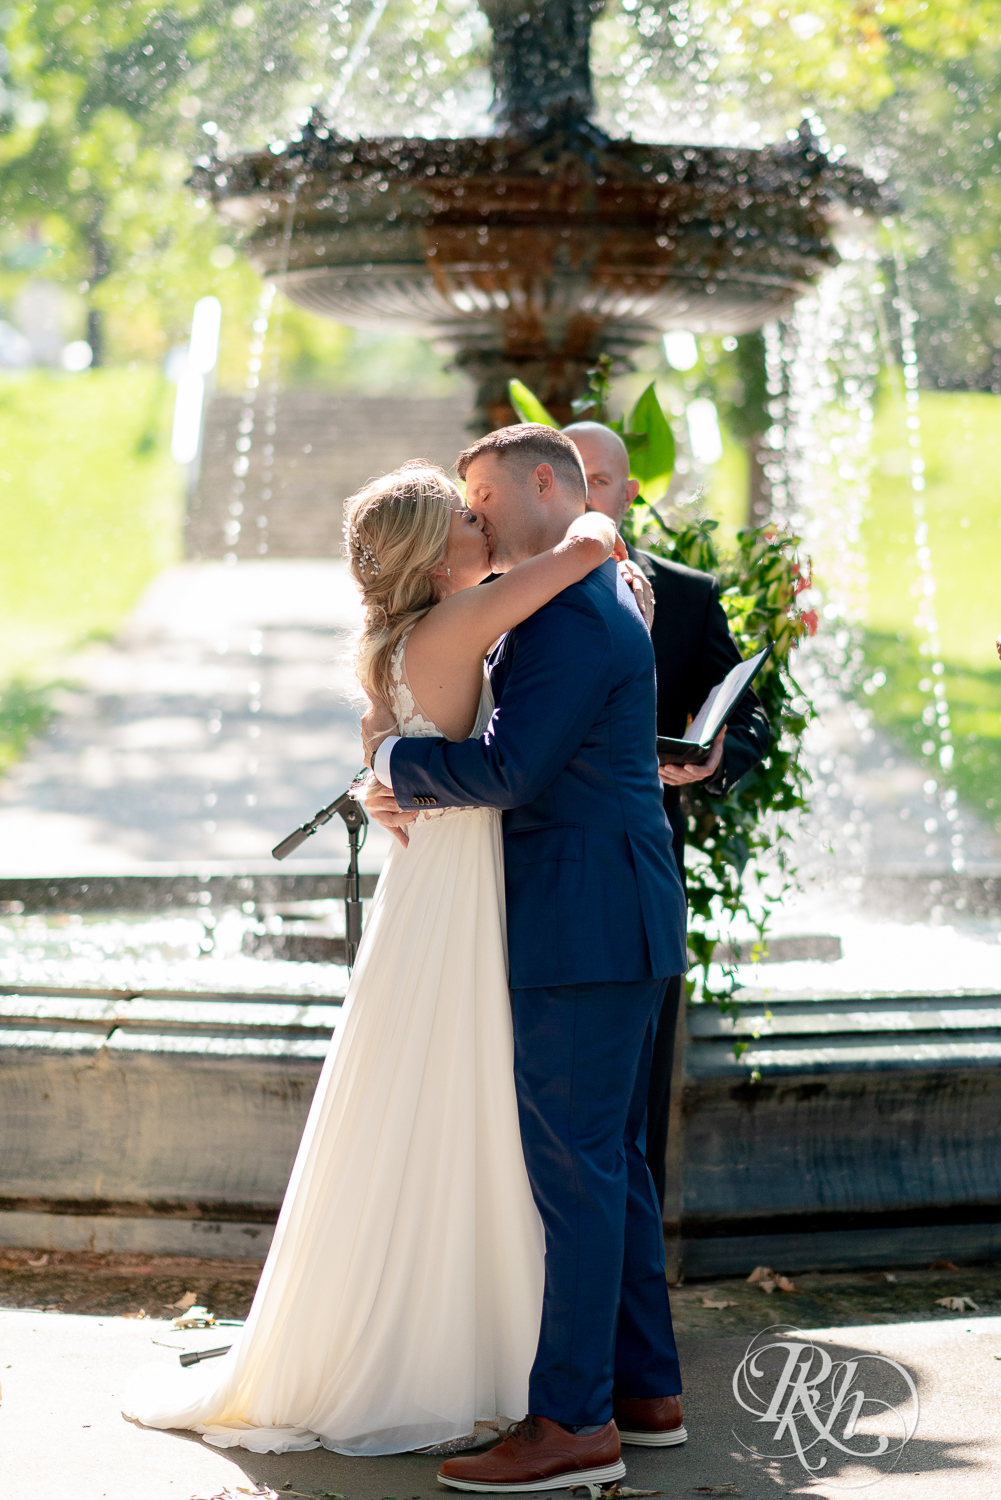 Bride and groom kiss in front of fountain at Irvine Park in Saint Paul, Minnesota.